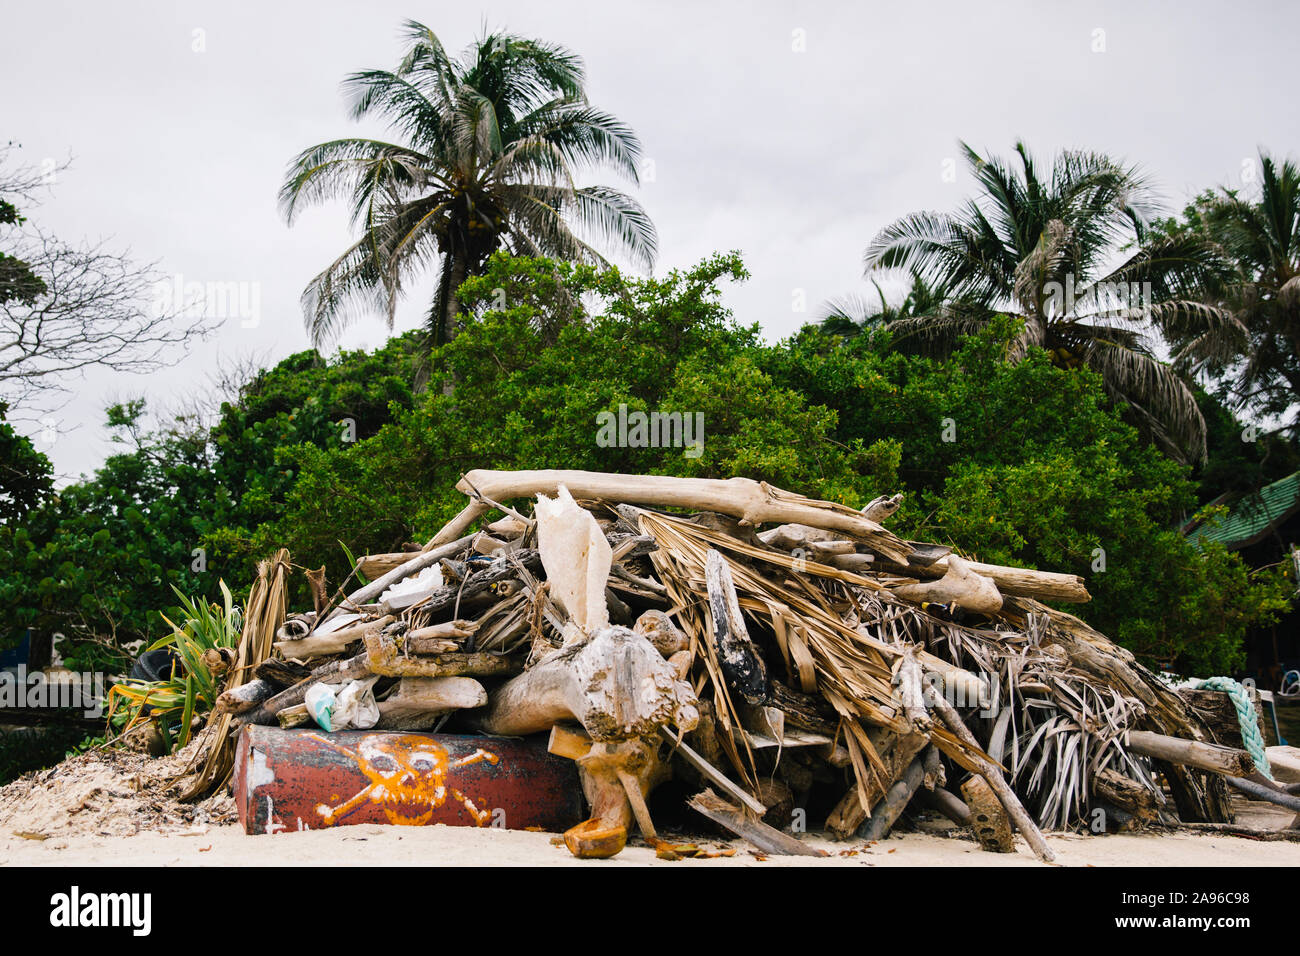 Garbage on the tropical beach as environmental pollution concept Stock Photo